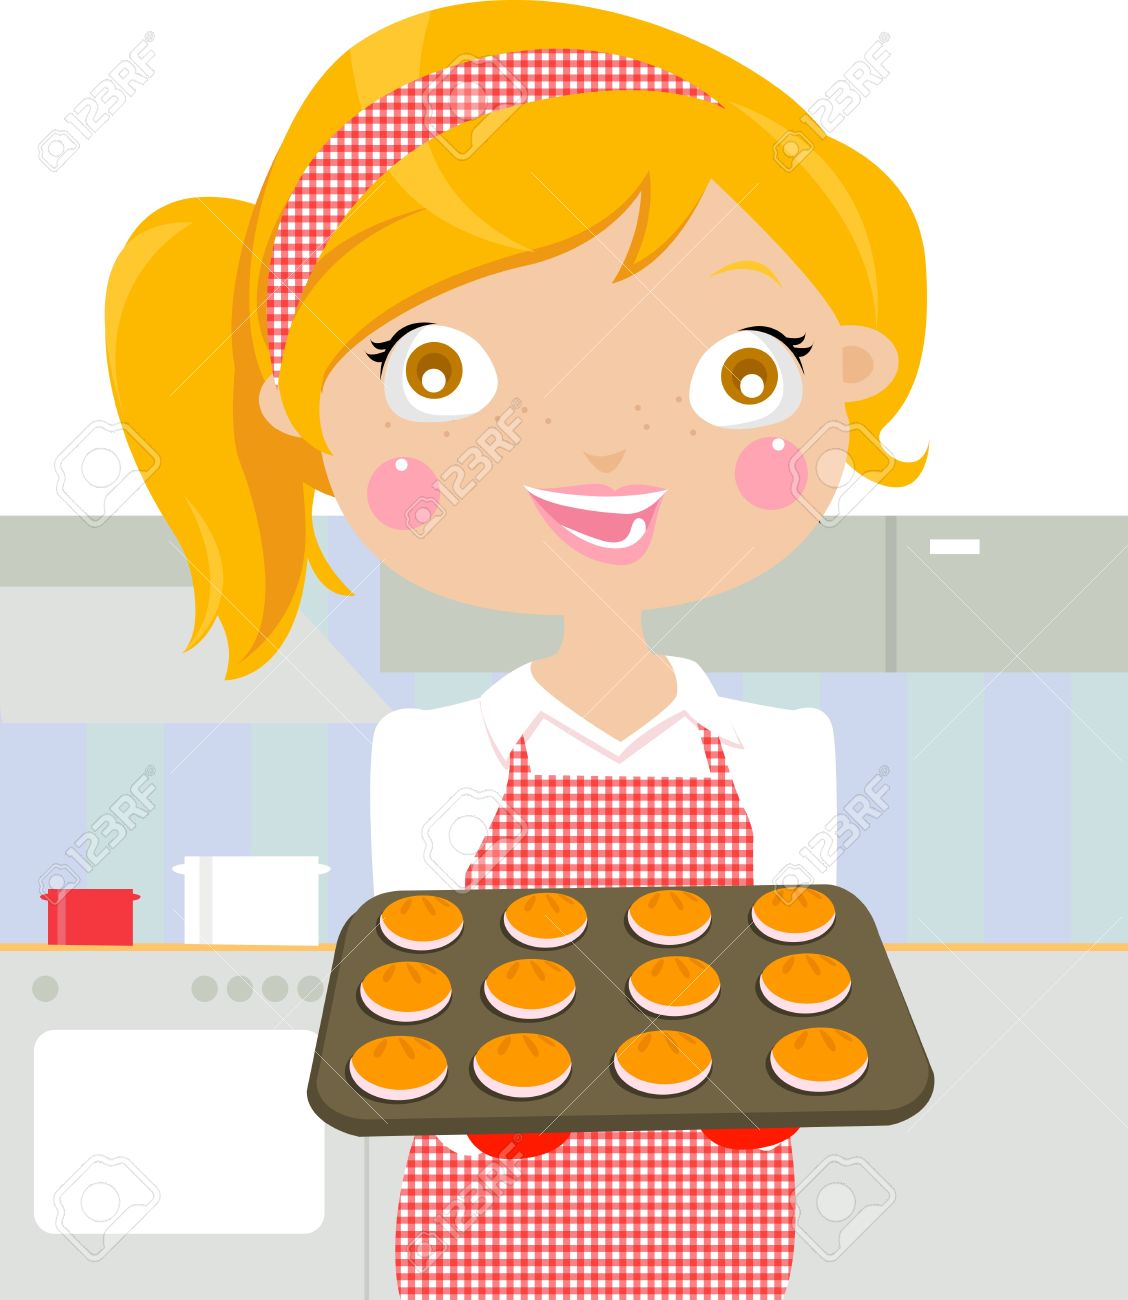 3577 Cookies free clipart.